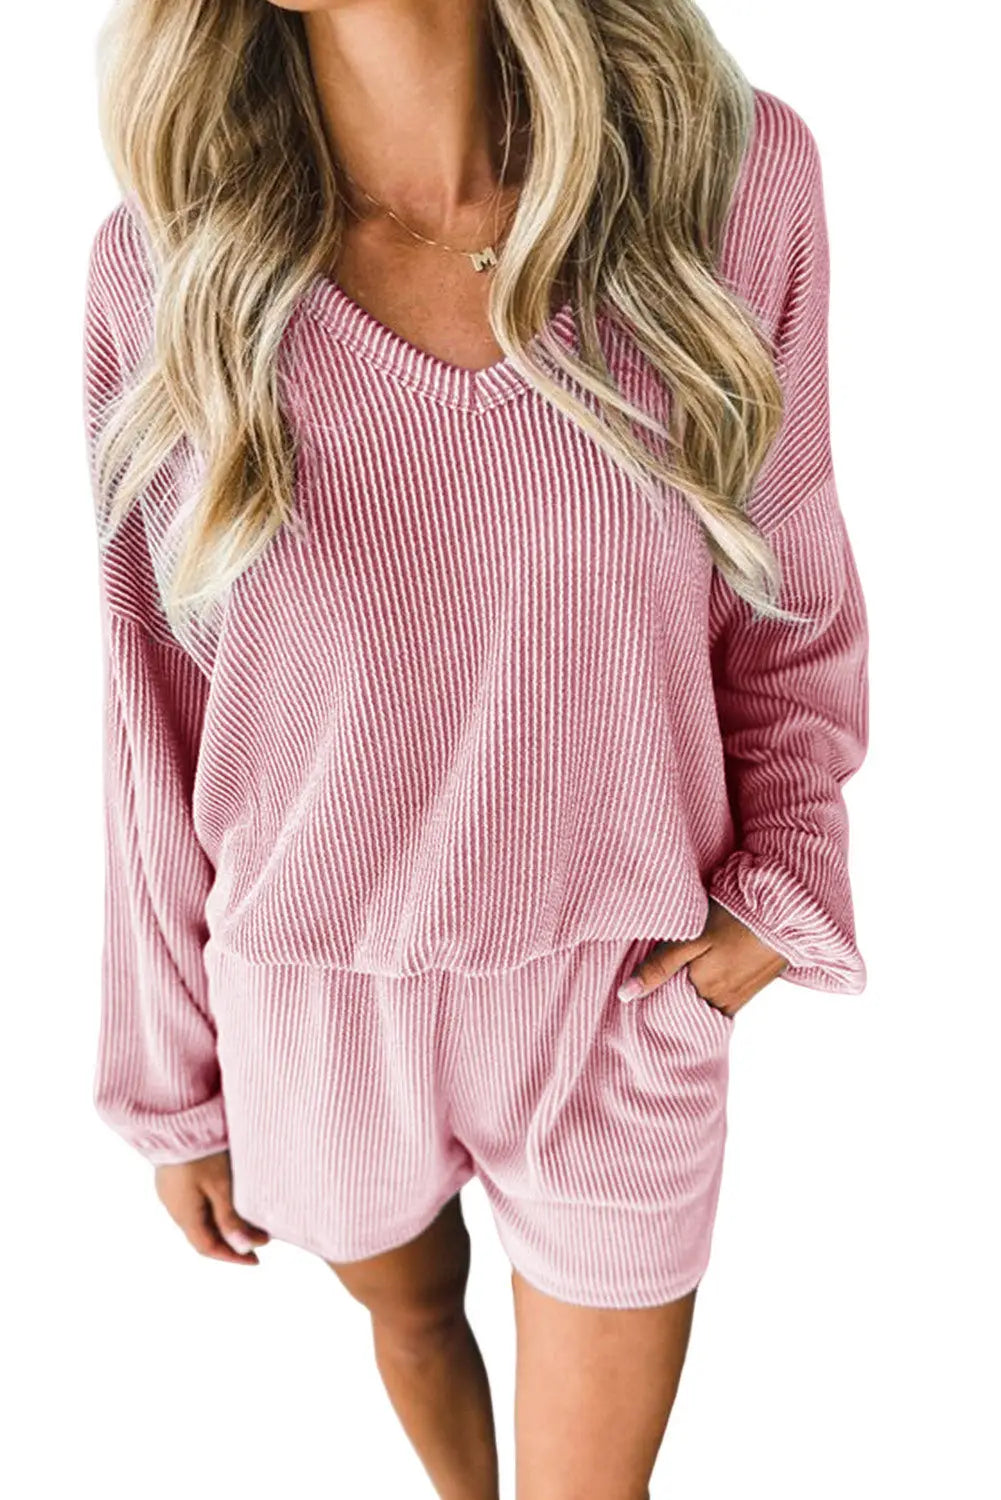 Pink corded v neck slouchy top pocketed shorts set - loungewear